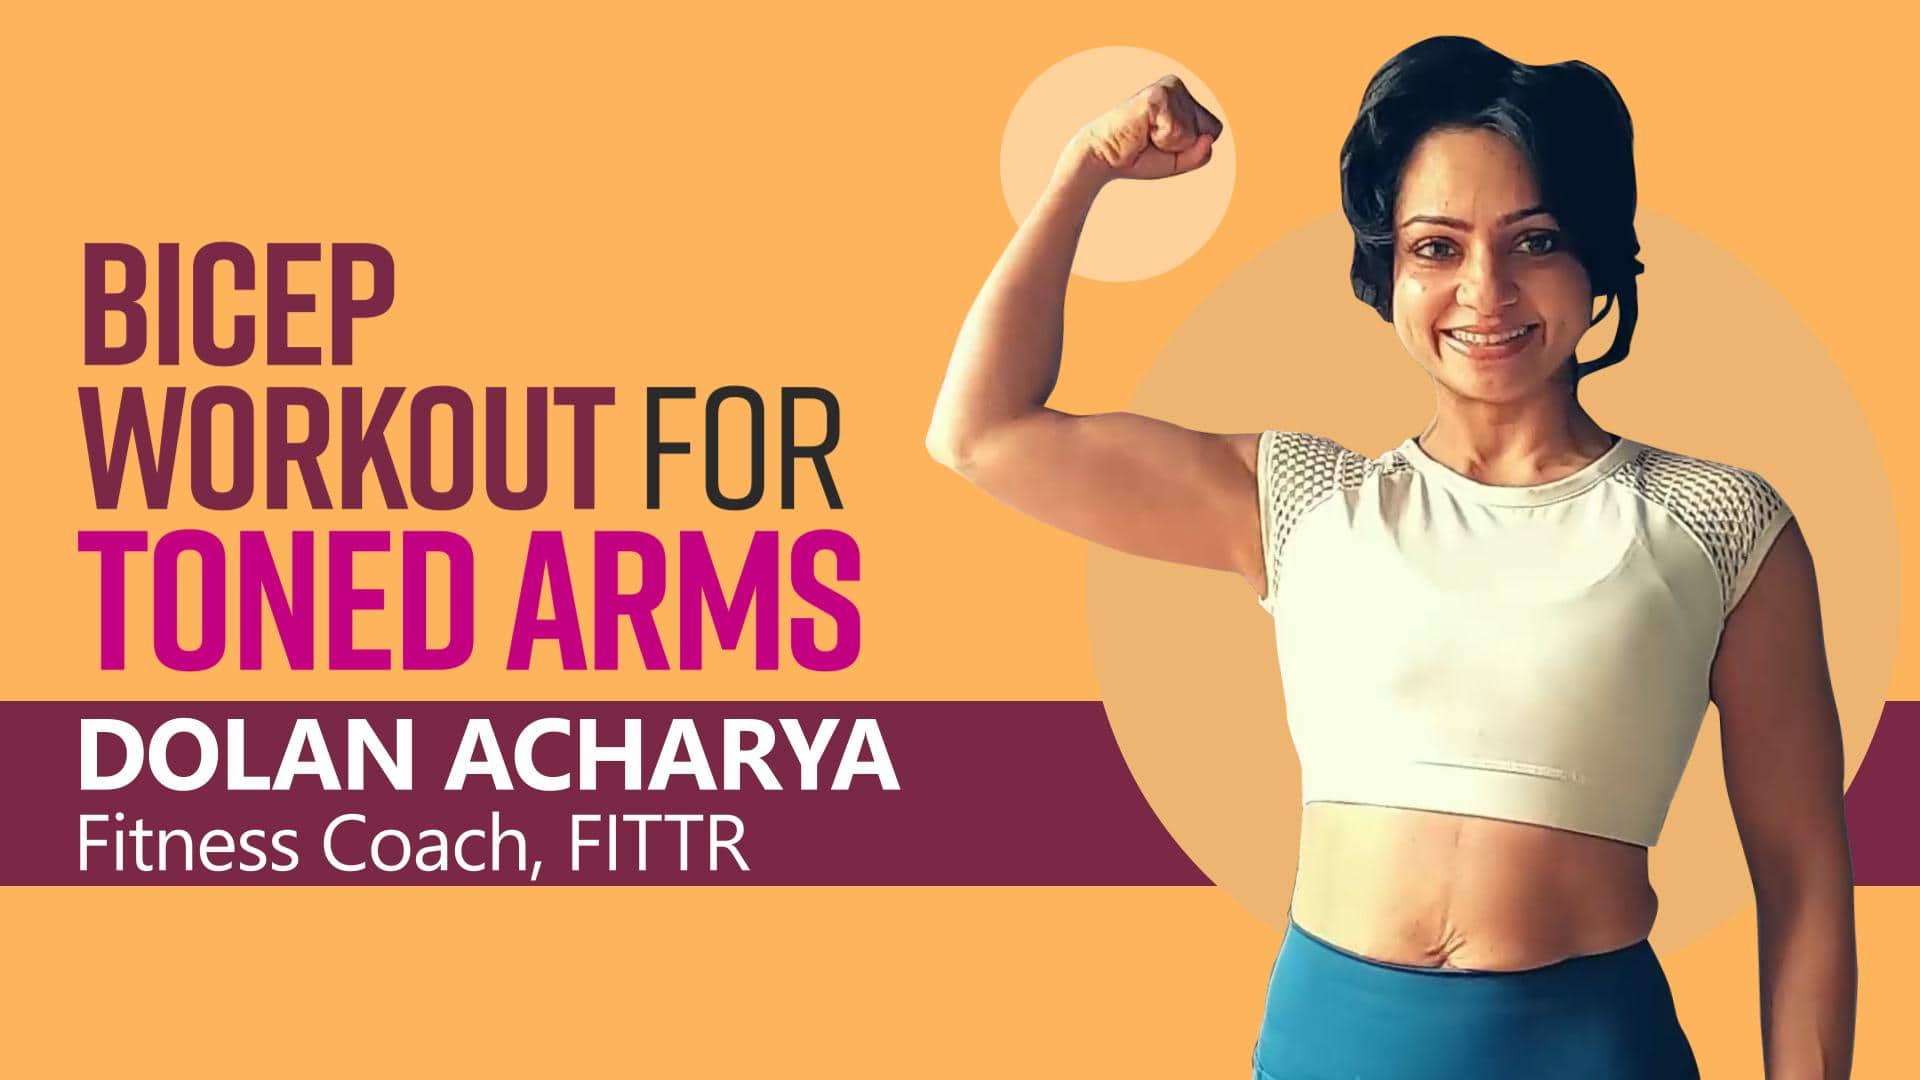 How To Get Toned Arms : 5 Easy Bicep Workout Exercises Explained